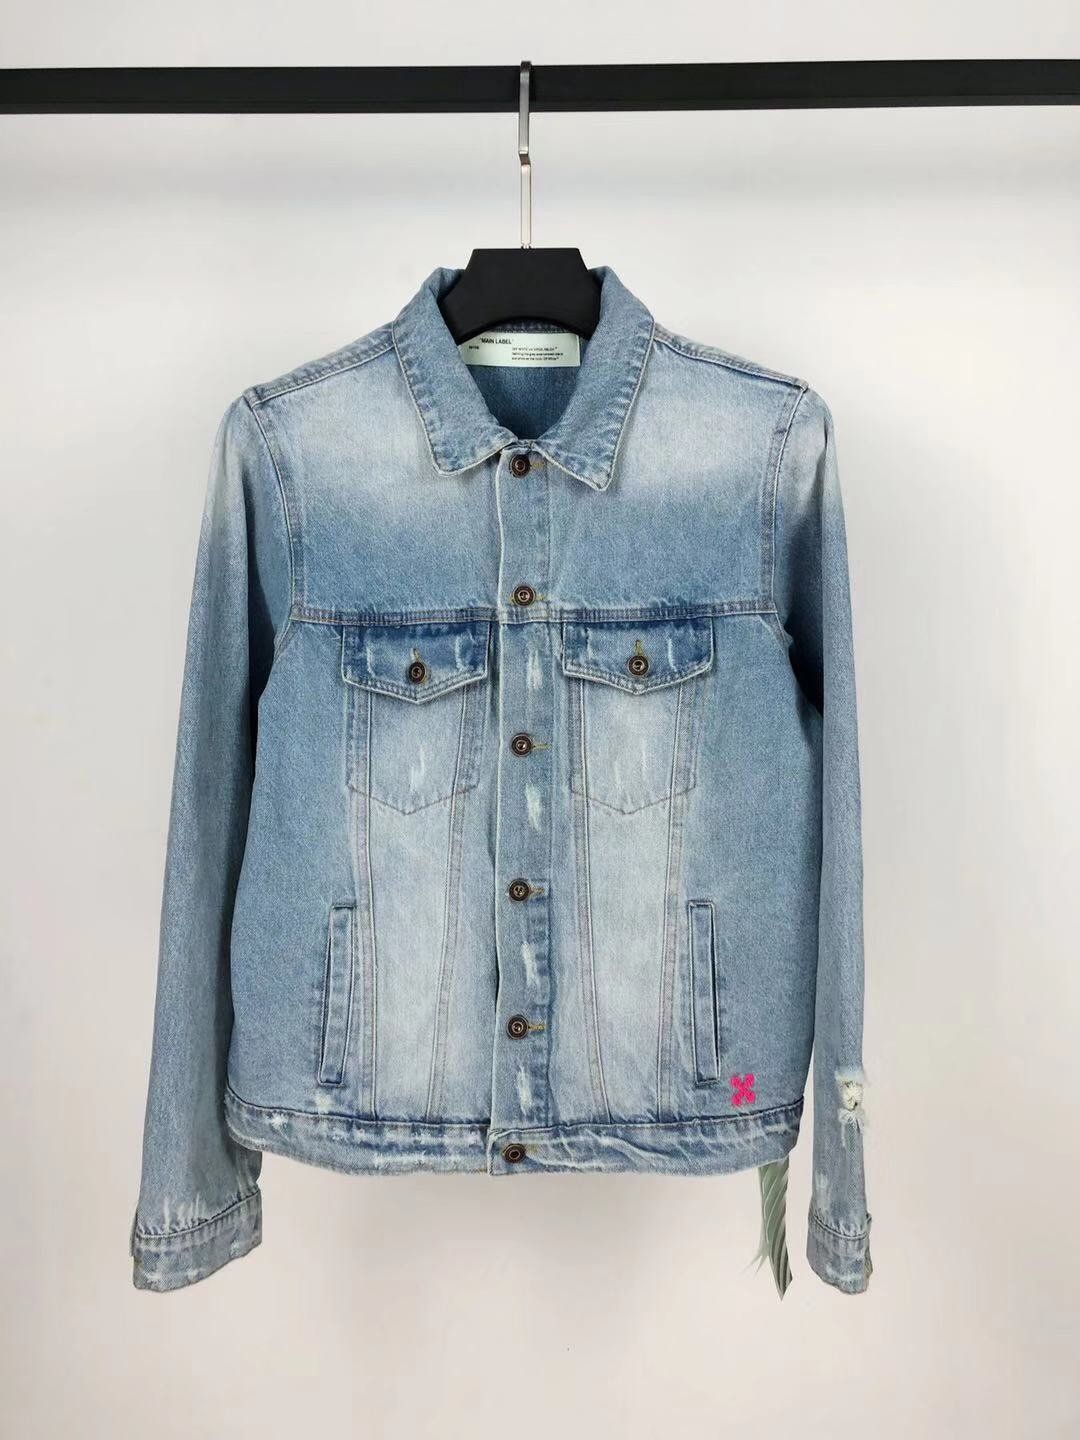 Anniv Coupon Below] 2019 New Mens And Womens Denim Jacket Off OW White Hand  Painted Denim S M L XL From Ahnfewvbrpmch, $60.92